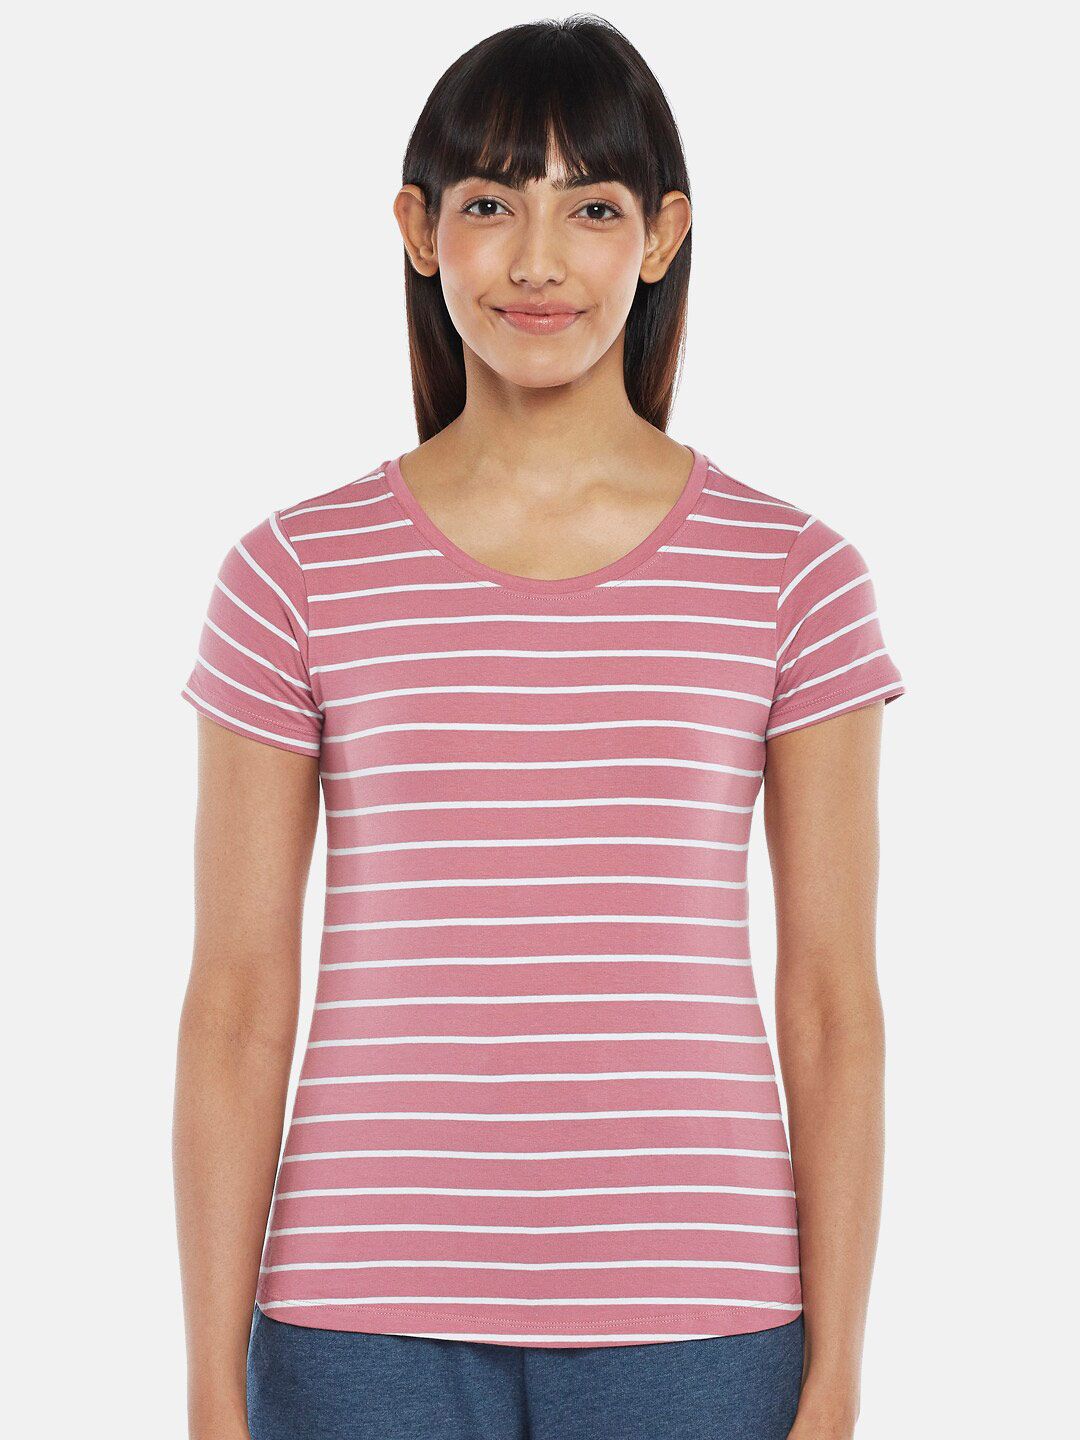 Dreamz by Pantaloons Rose Striped Top Price in India